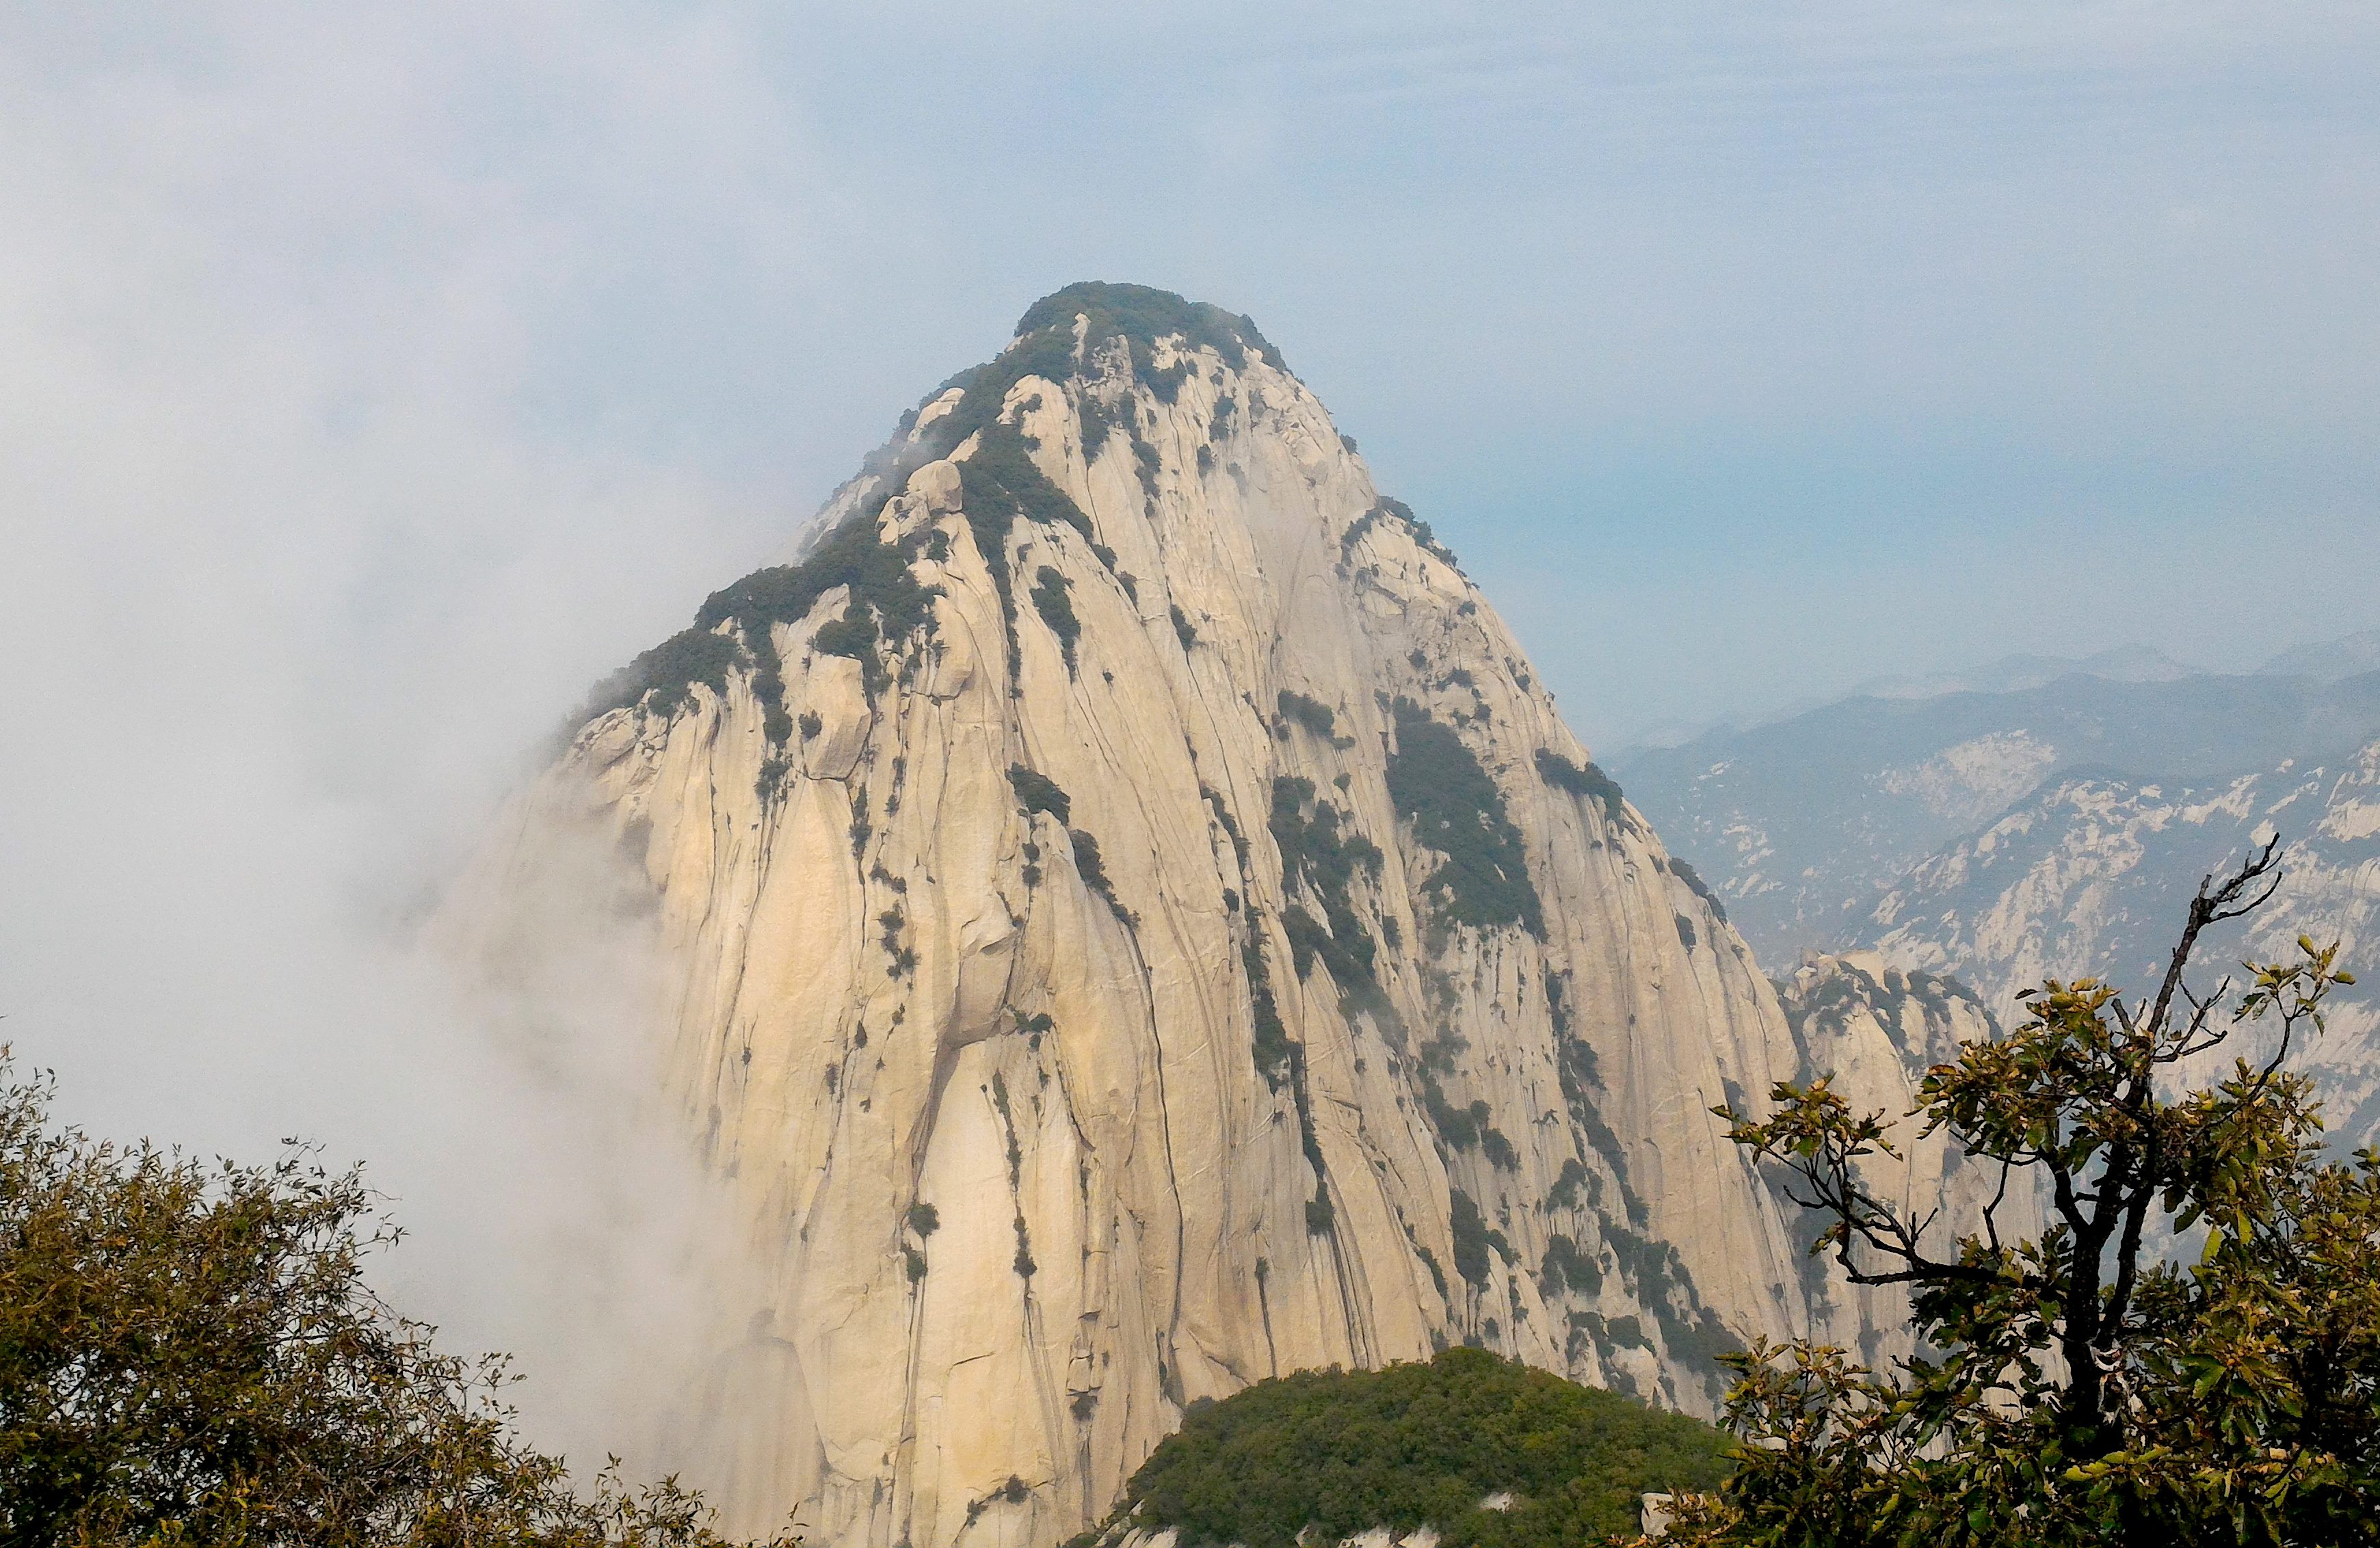 THE PRECIPITOUS MOUNTAIN UNDER HEAVEN. Mount Hua is famous for having steep cliffs and plunging ravines. Photo by Pauline Buenafe
 